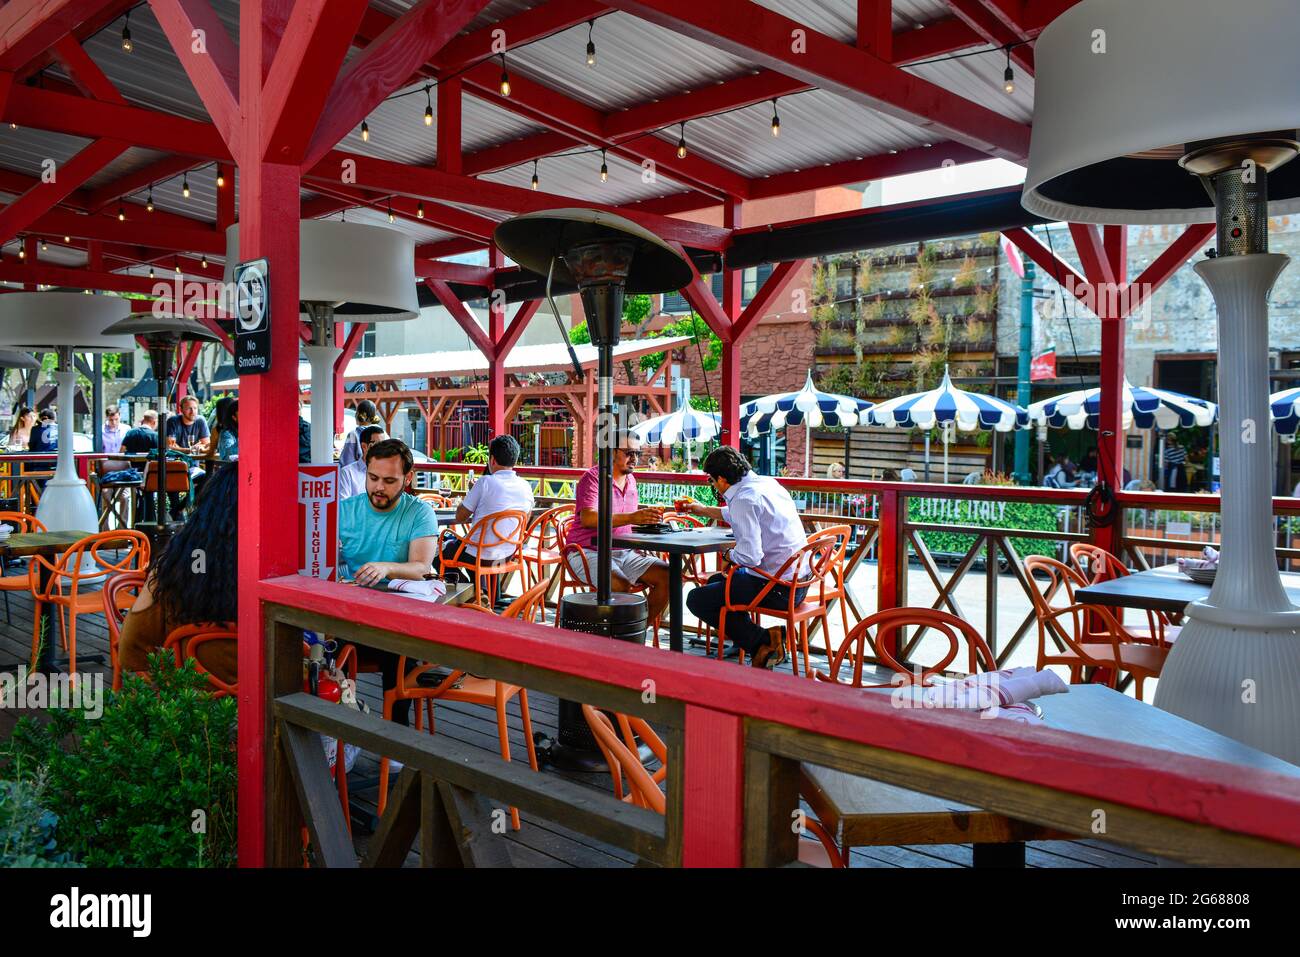 People enjoy the trendy eateries that line India Street with outdoor patio seating in the 'Little Italy' district of downtown San Diego, CA, USA Stock Photo